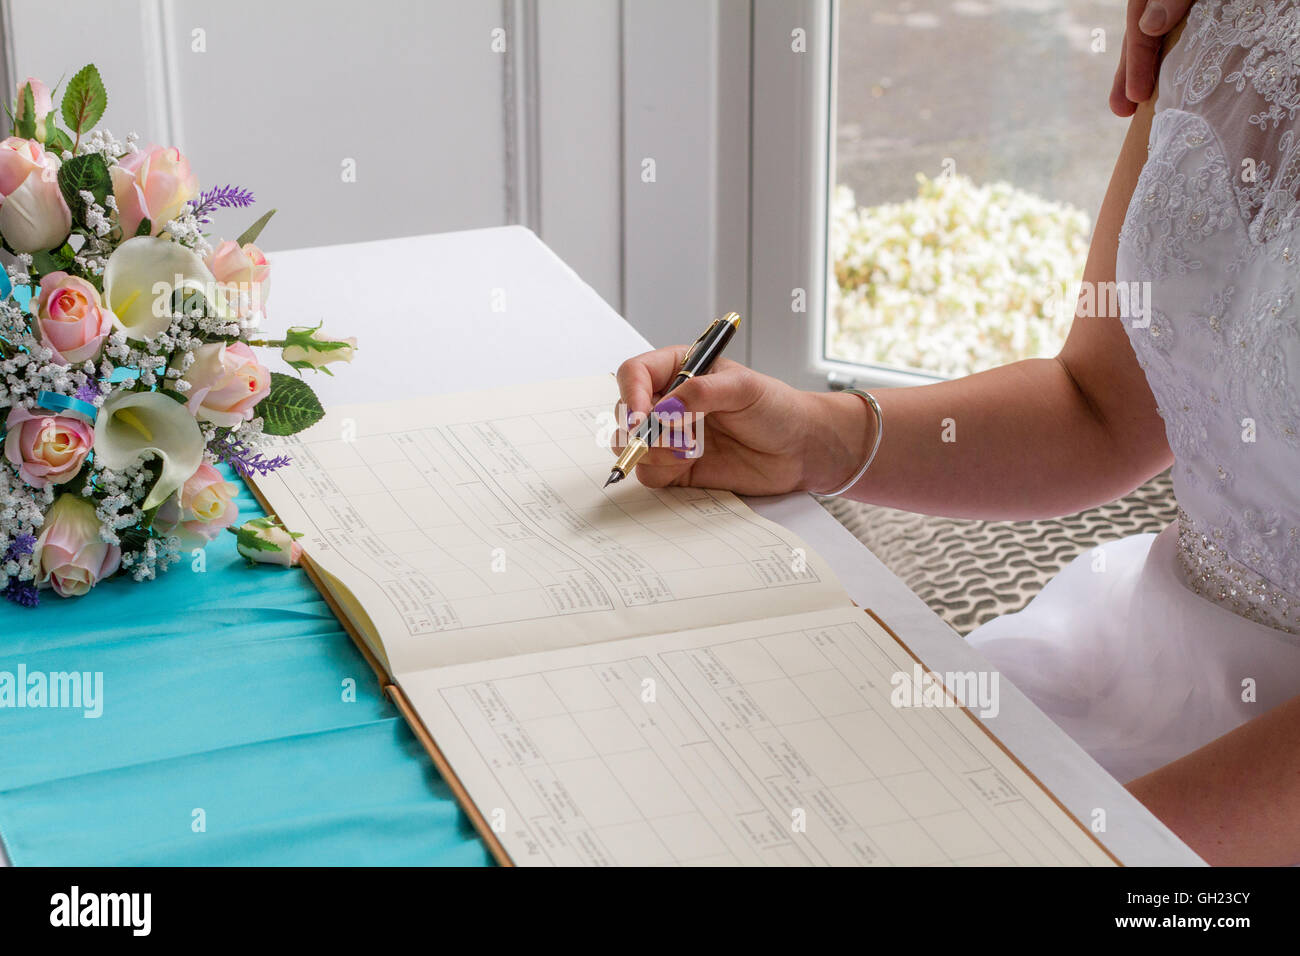 The bride signing the register at her wedding day to confirm her marriage. Stock Photo